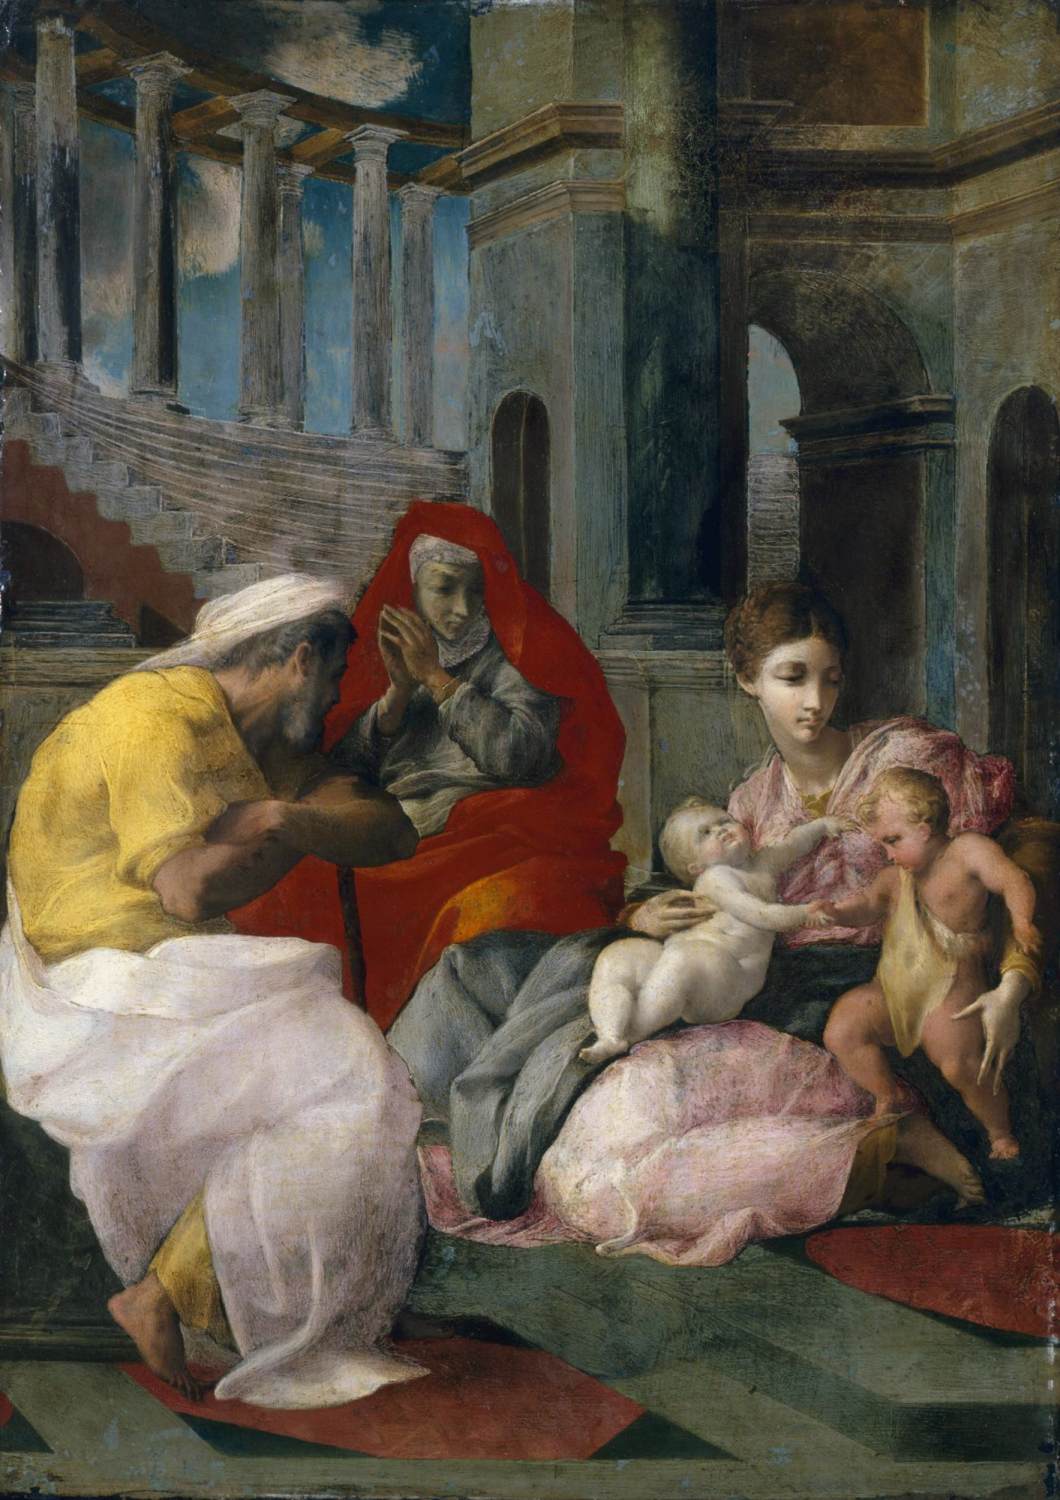 The Holy Family with Saint Elizabeth and John the Baptist